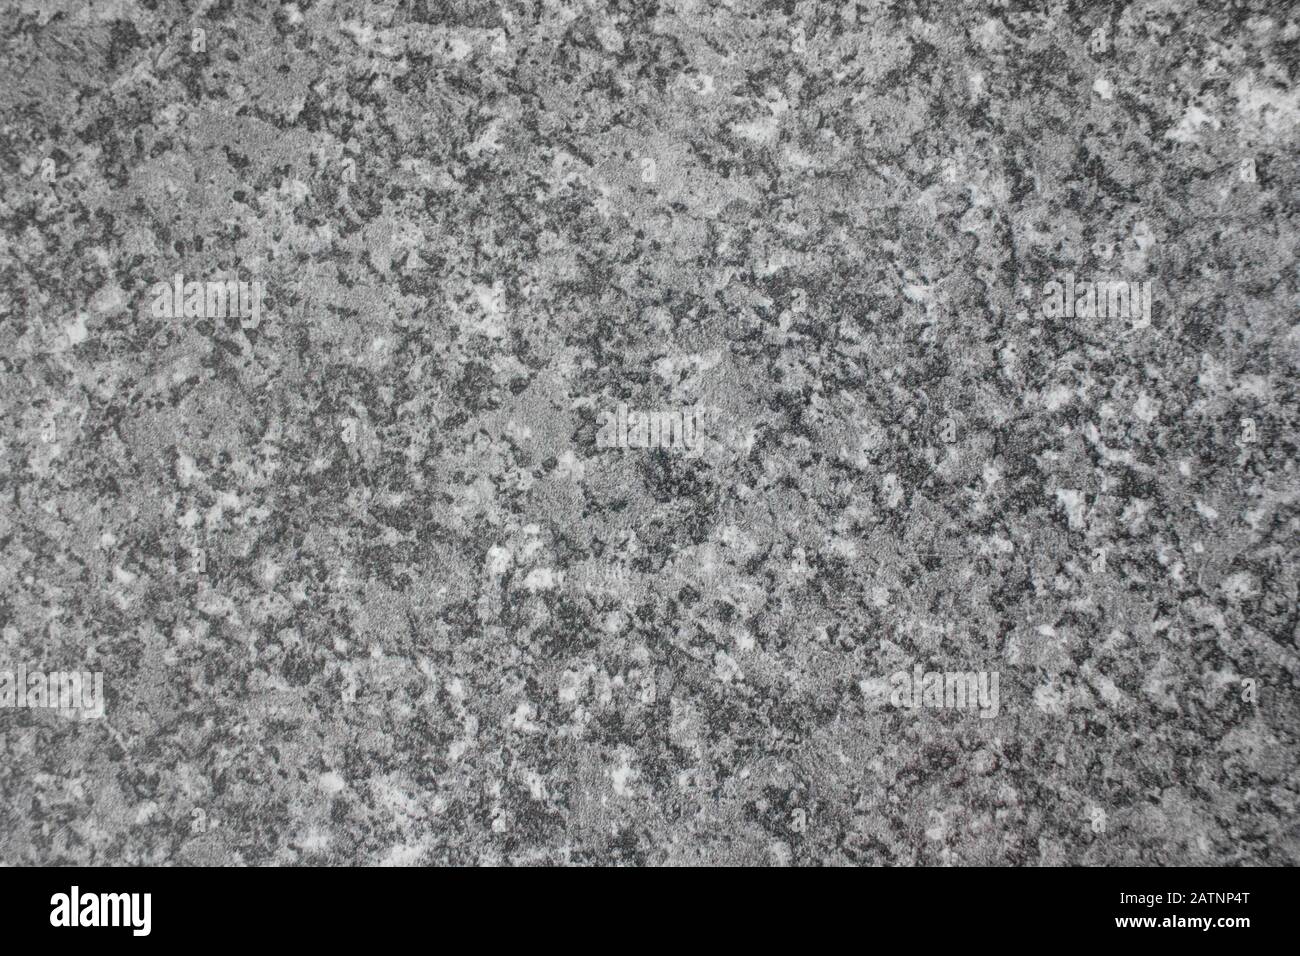 Top View of Black and Grey Mable Effect Stone - Bakground, Display, Presentation, Room for Text Stock Photo